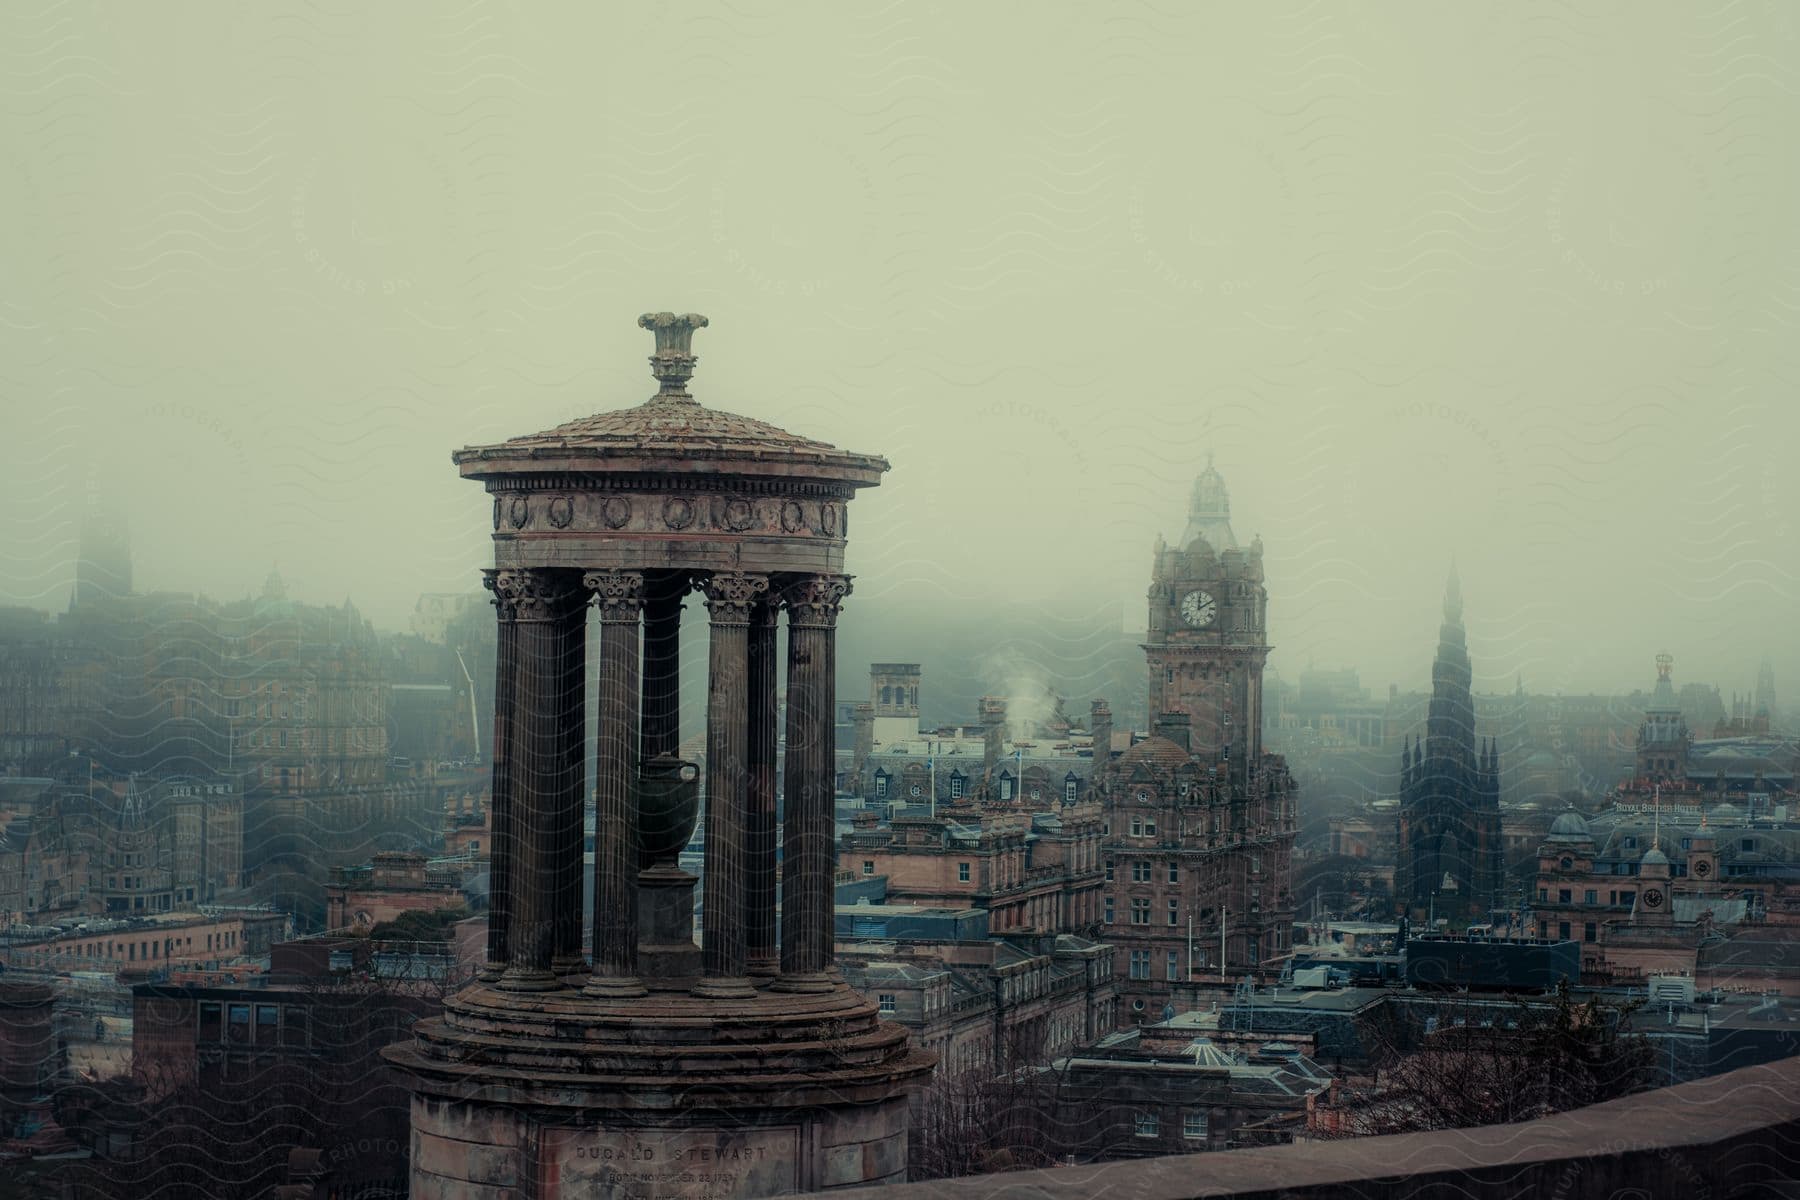 Aerial of a misty historic city, with a classical monument in the foreground and ancient buildings in the background, evoking a sense of mystery and architectural beauty.